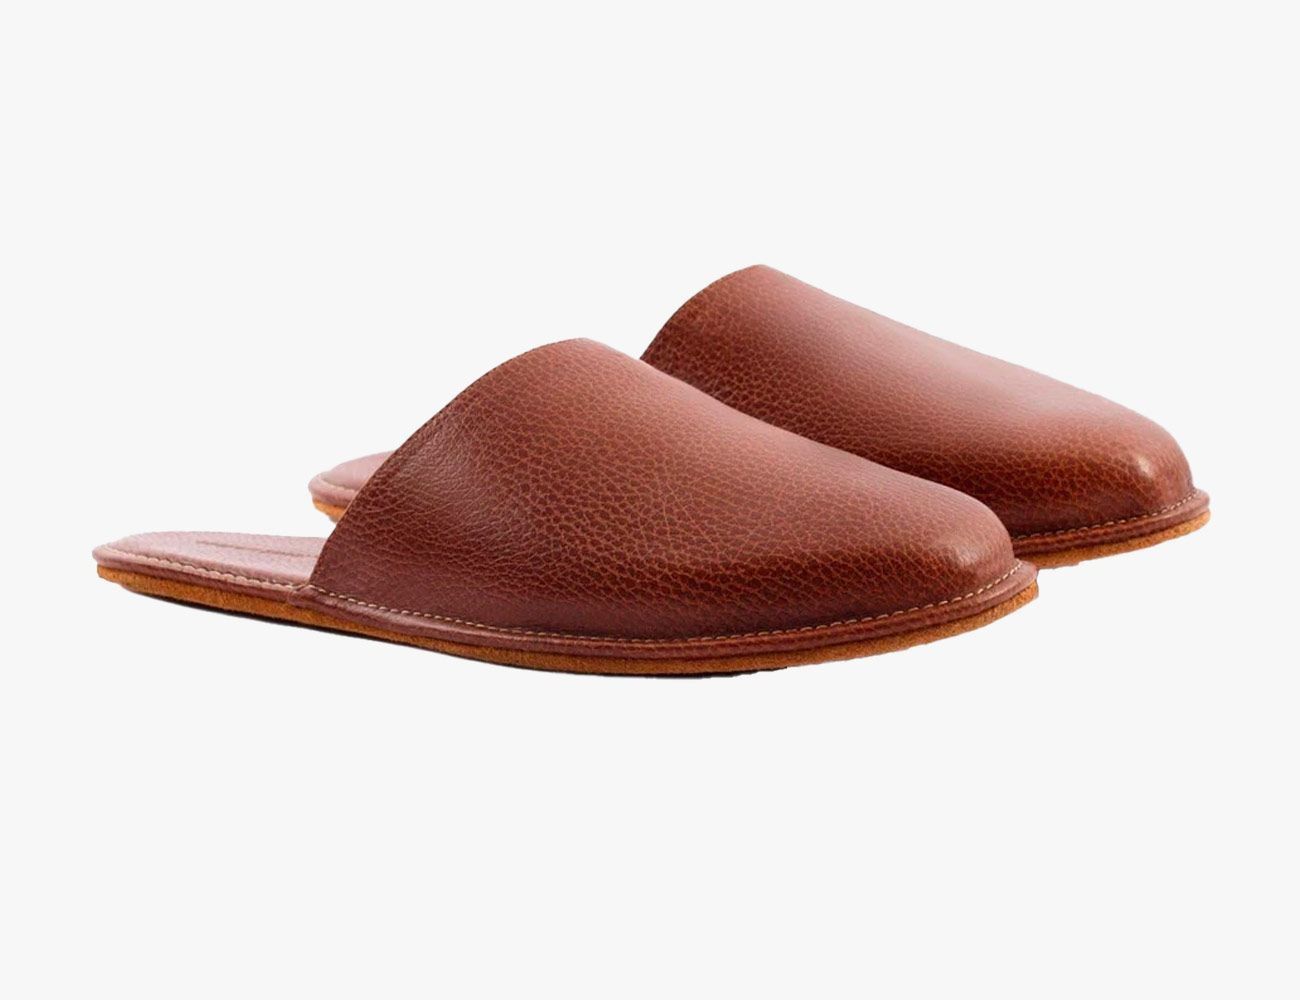 The Best Slippers for Keeping Your Feet Warm All Winter Long